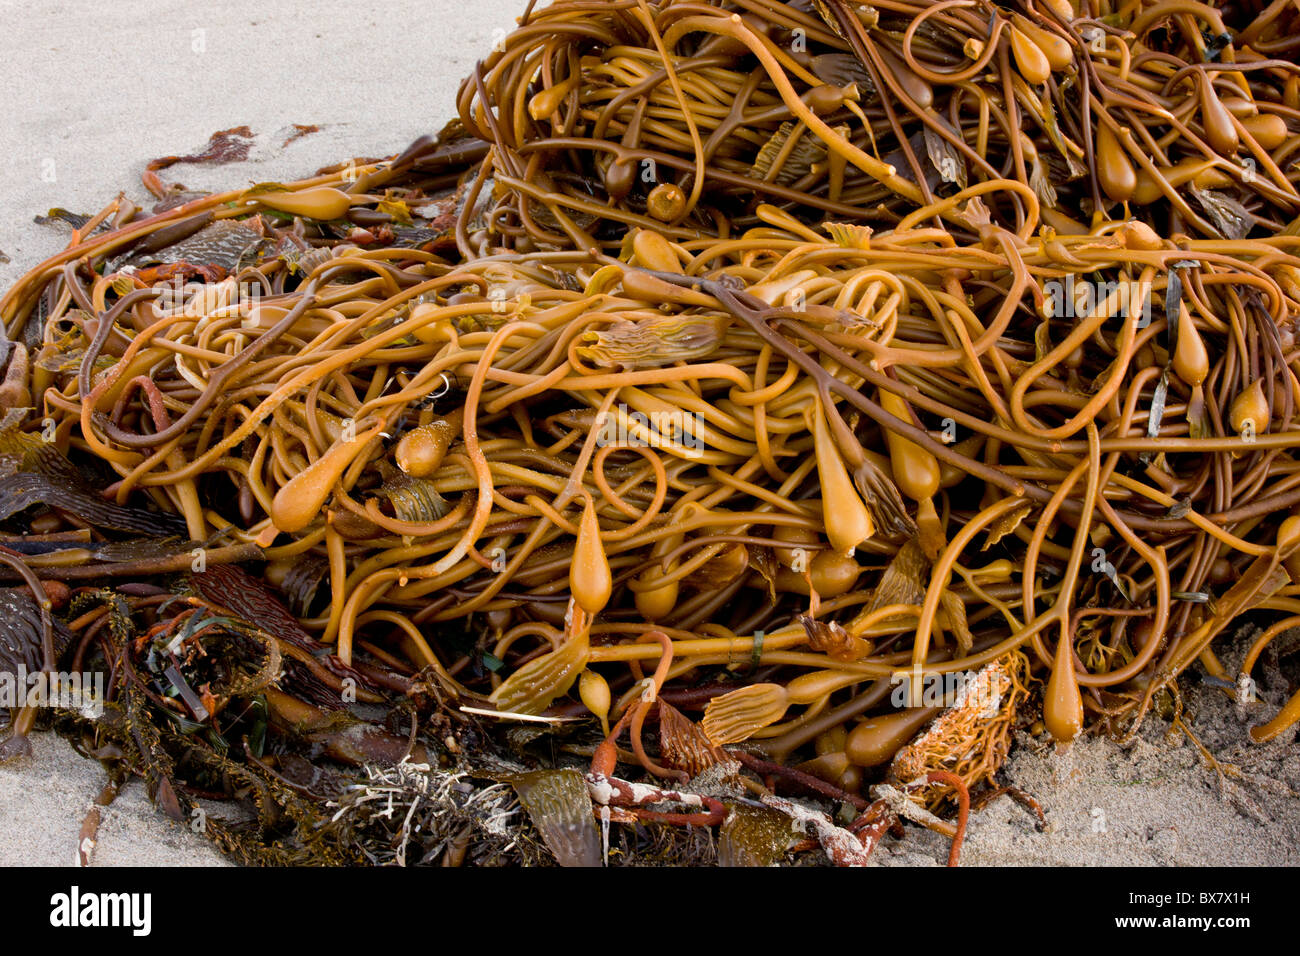 Giant Kelp Macrocystis pyrifera, with pneumatocysts (air bladders) washed up from Pacific after a storm, California Stock Photo